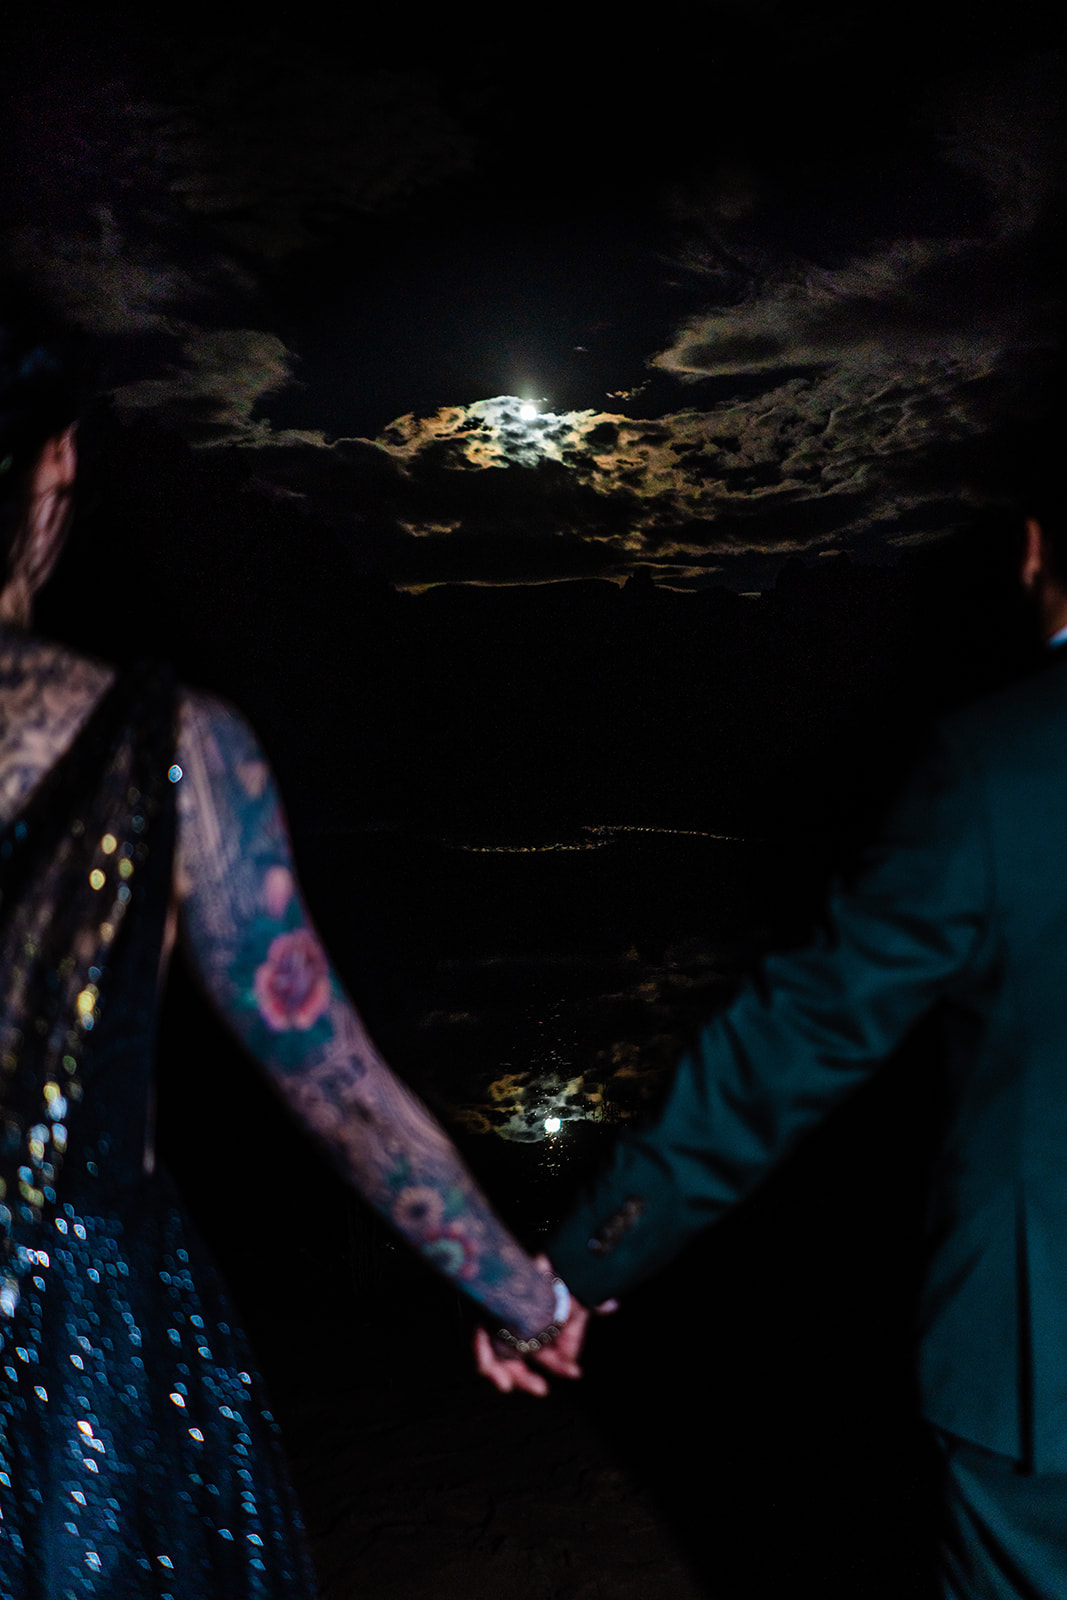 Bride and groom holding hands in spooky attire